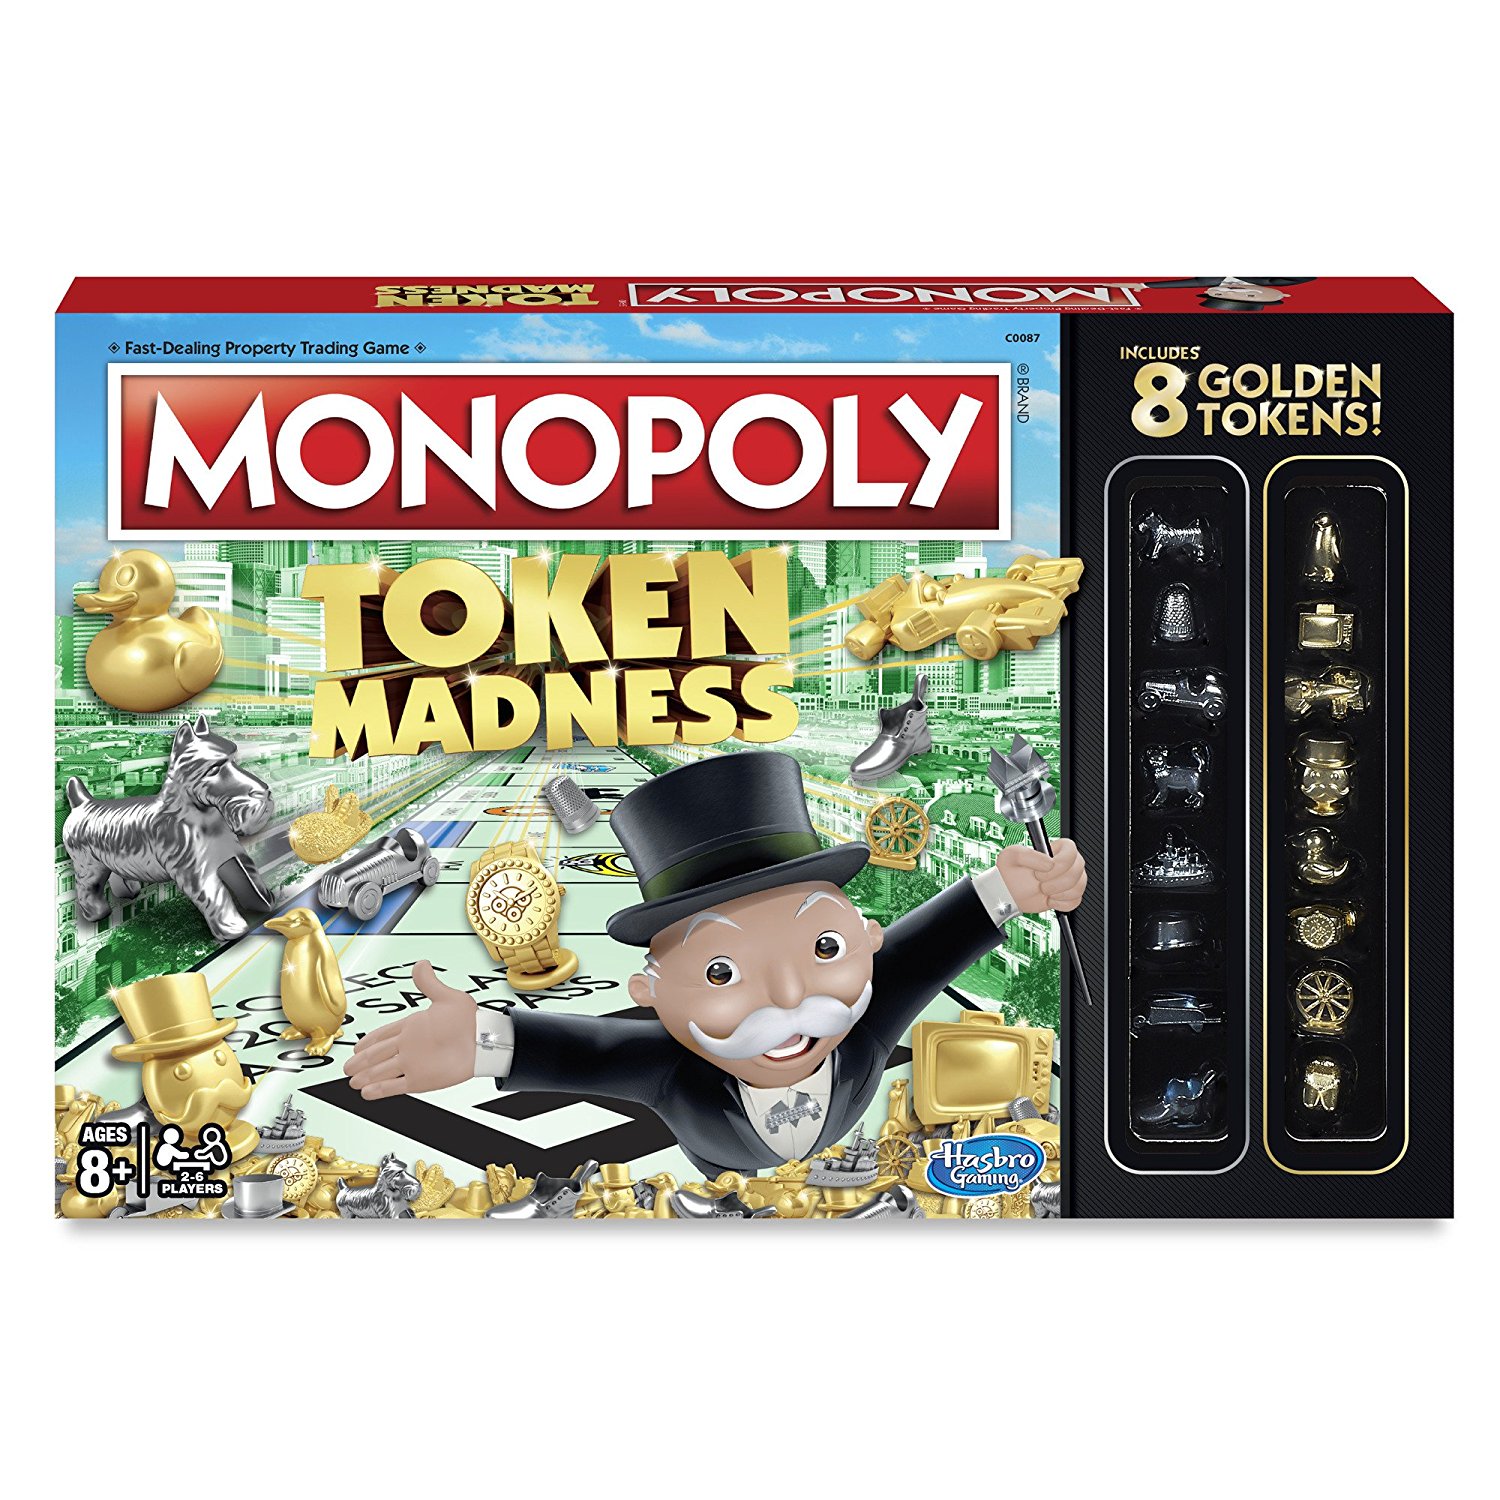 Monopoly Token Madness Game